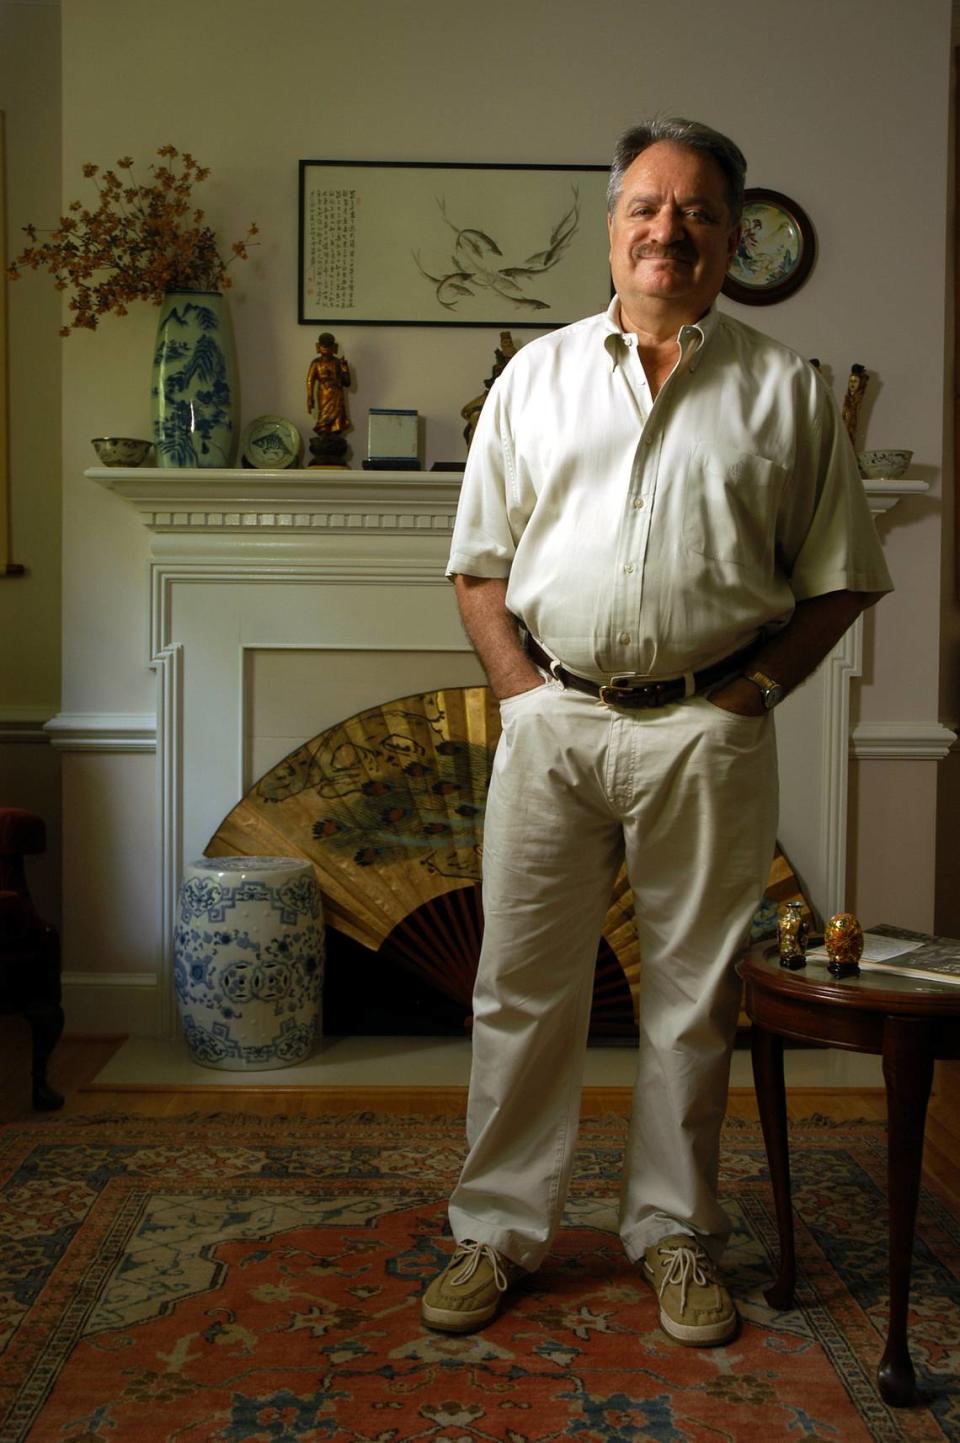 Poet-in-residence John Balaban in his Cary home.